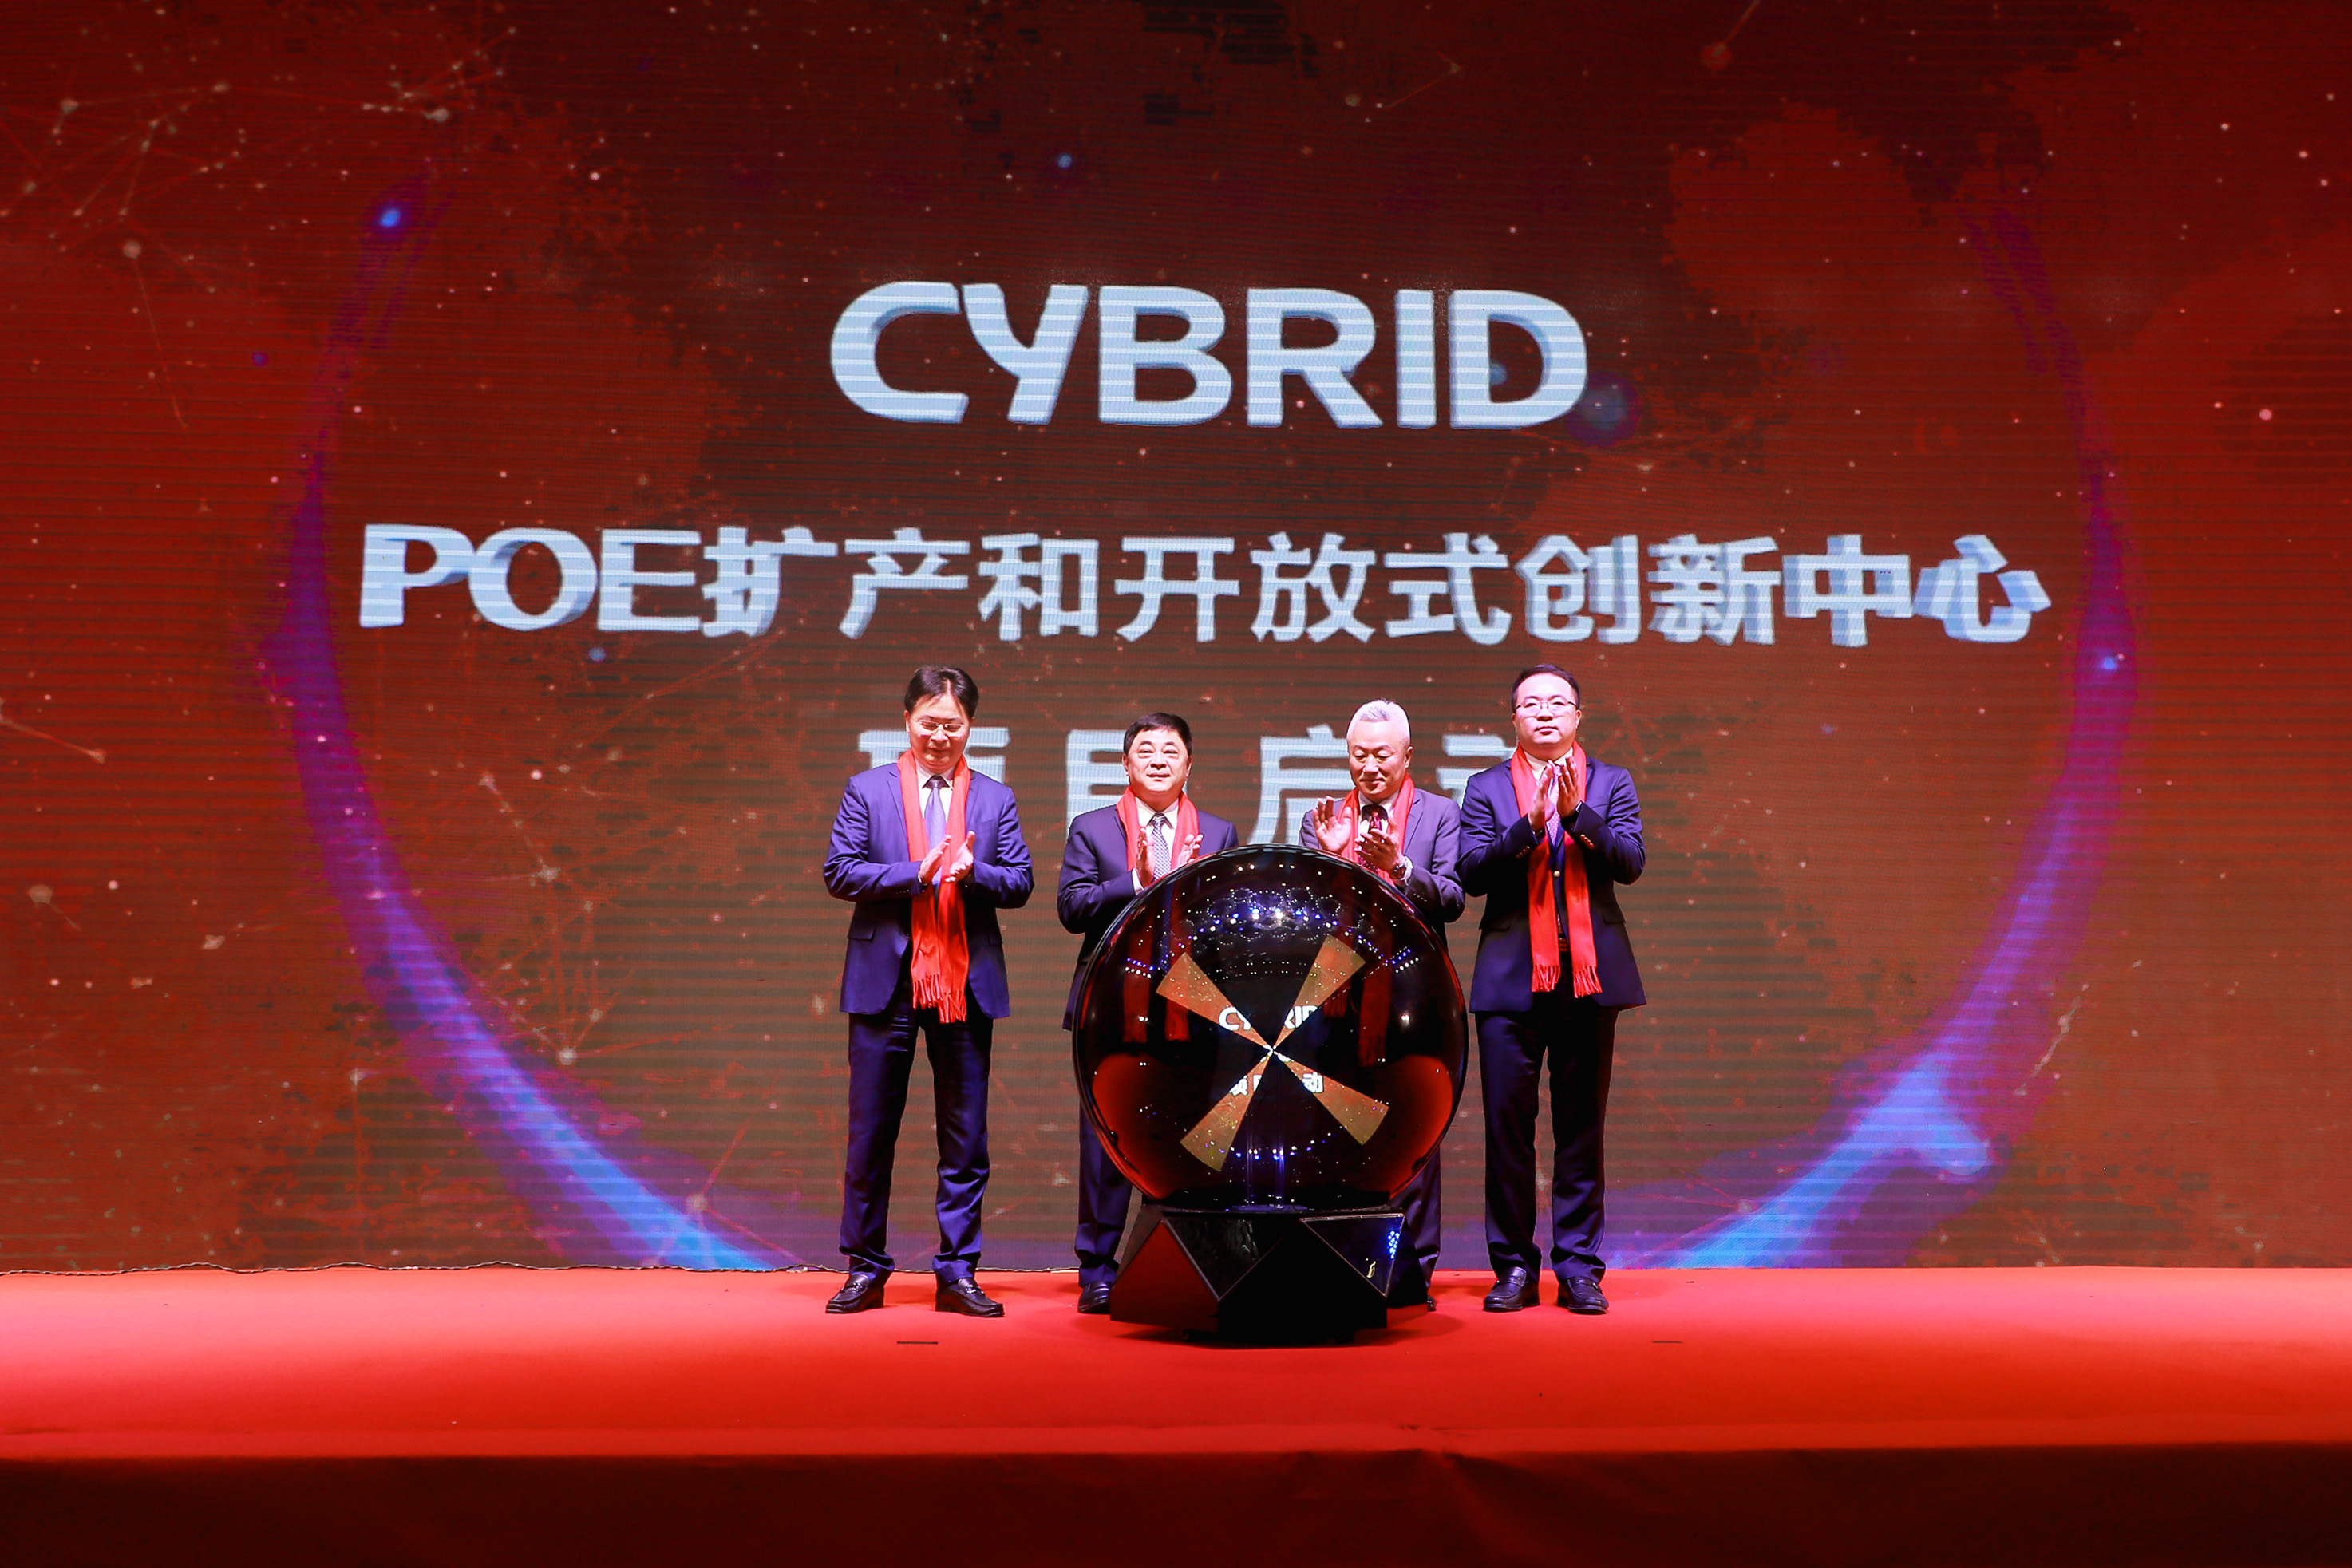 Cybrid invested 435 million yuan to expand POE encapsulation film project to secure market share.